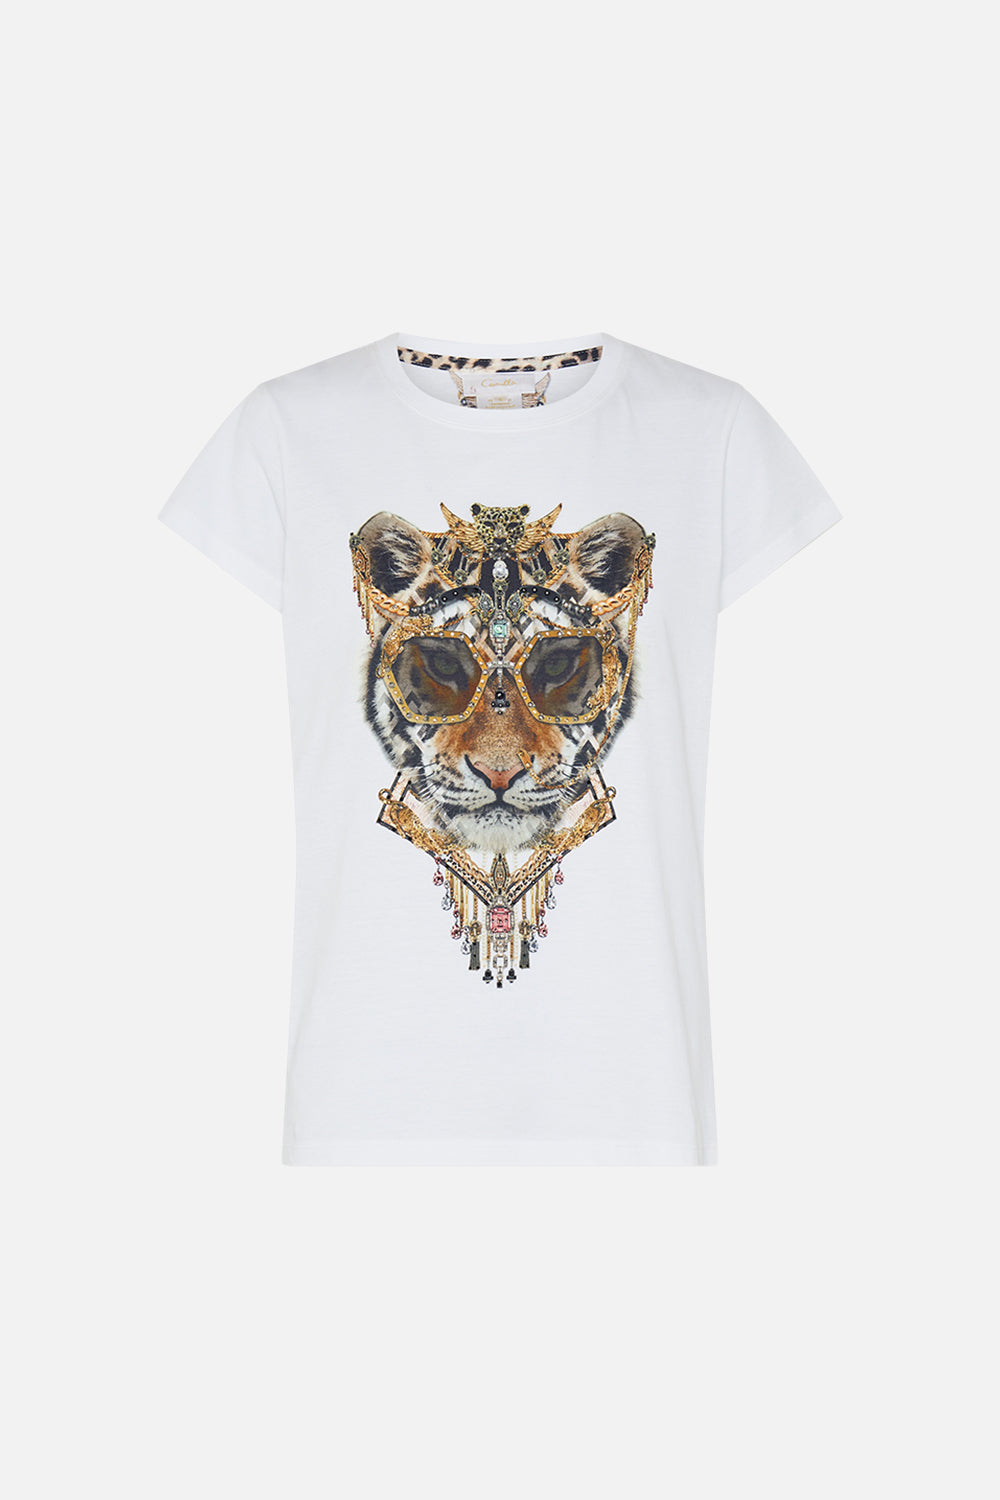 Product view of CAMILLA animal print t shirt in Mosaic Muse 